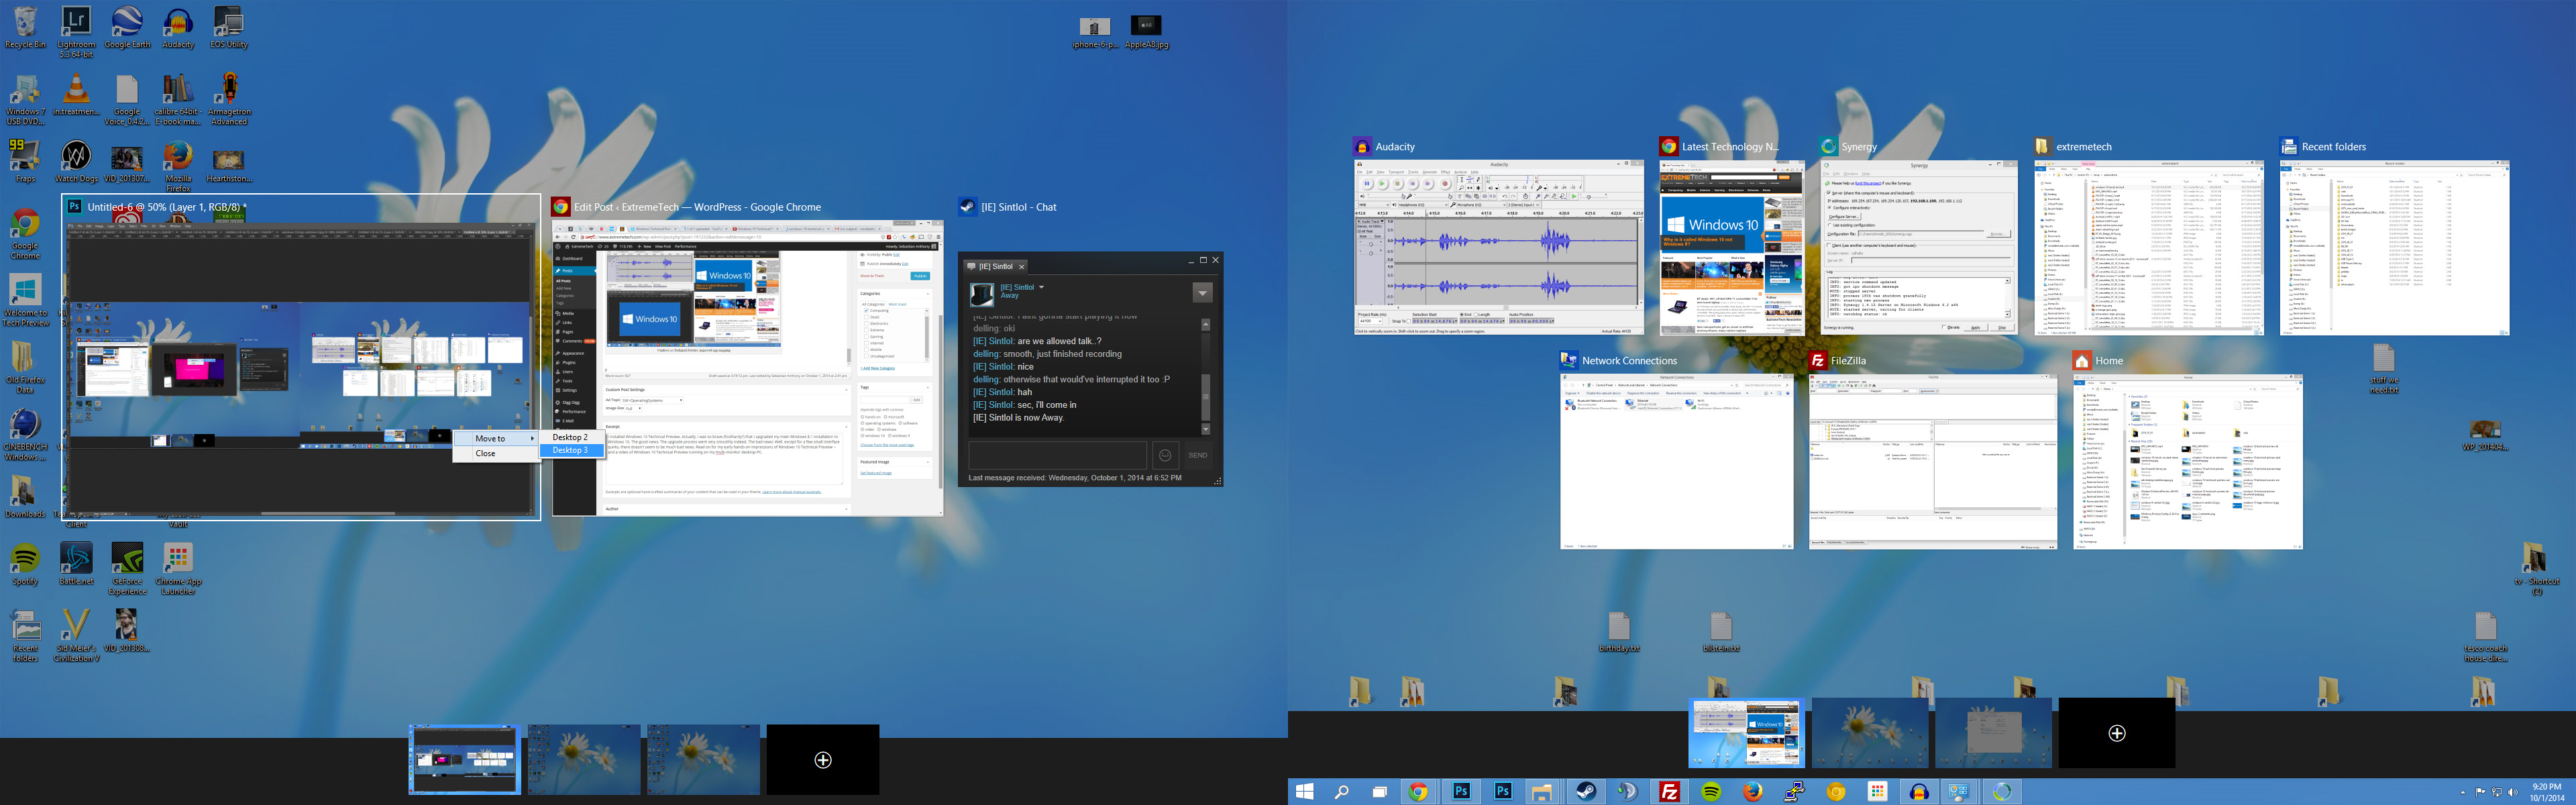 Virtual Desktops Might Look Impressive But You Can T Do A Whole Lot